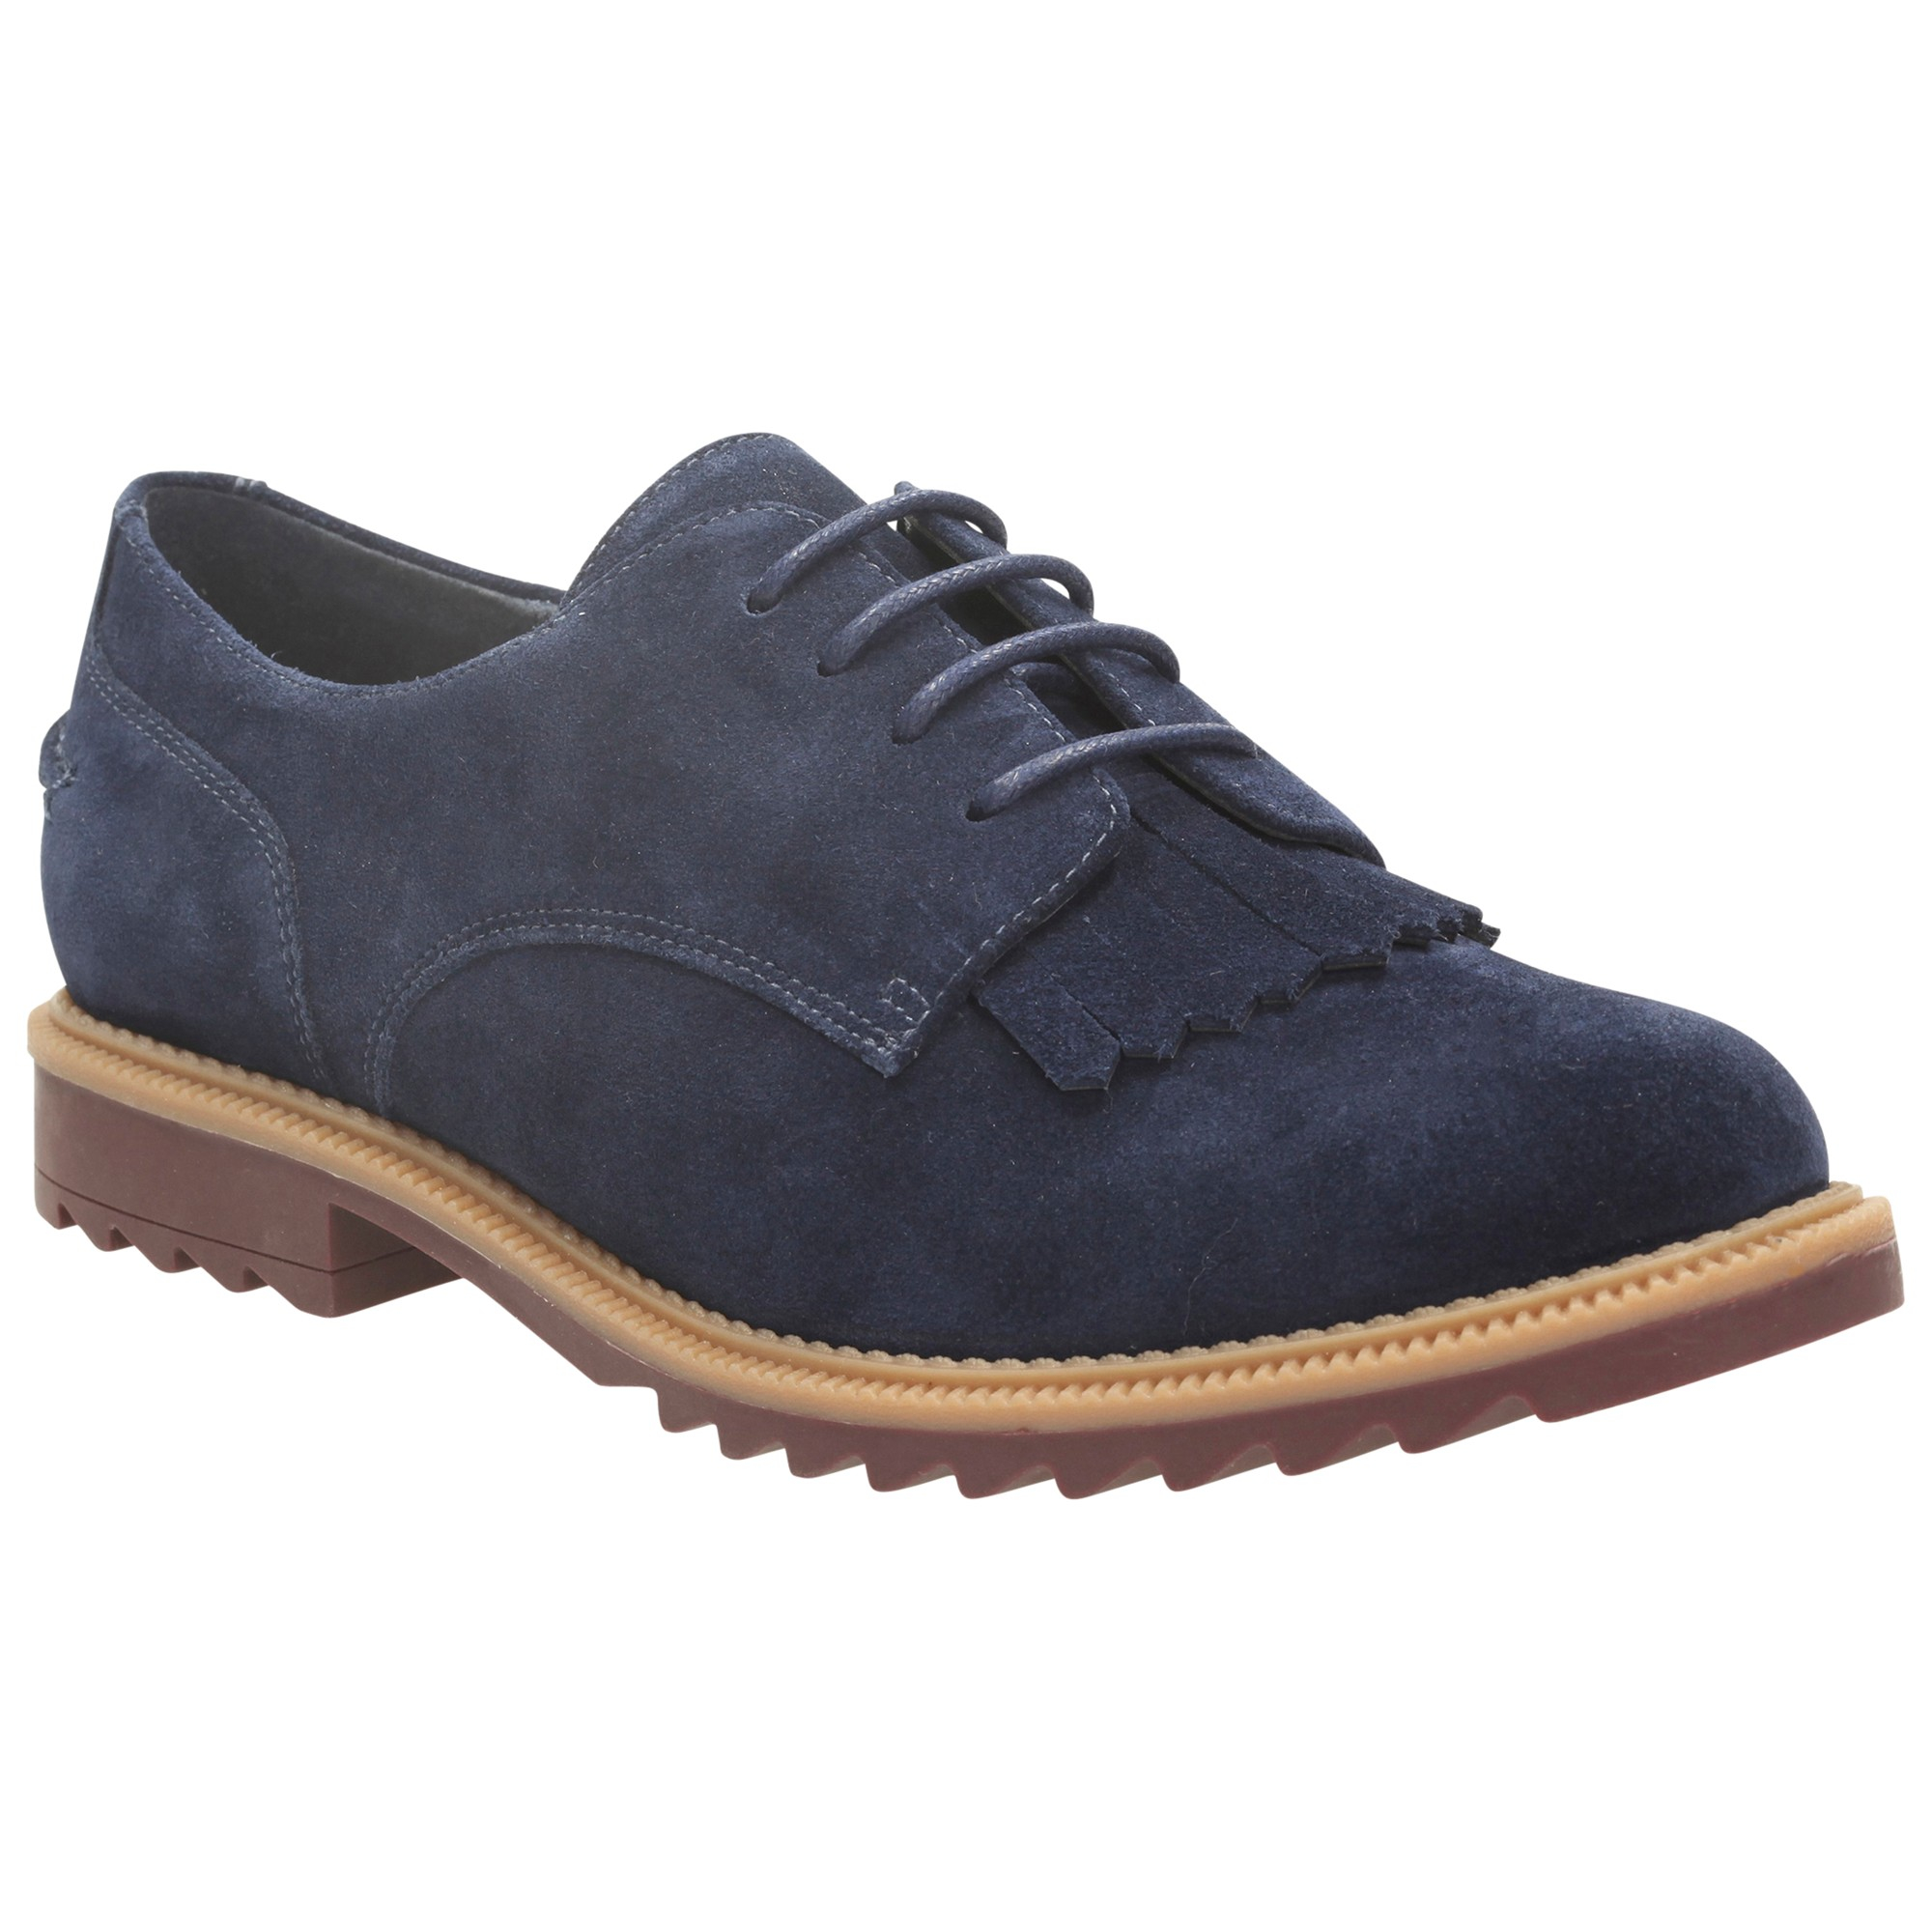 Clarks Griffin Mabel Tassel Brogues in Navy Suede (Blue) - Lyst